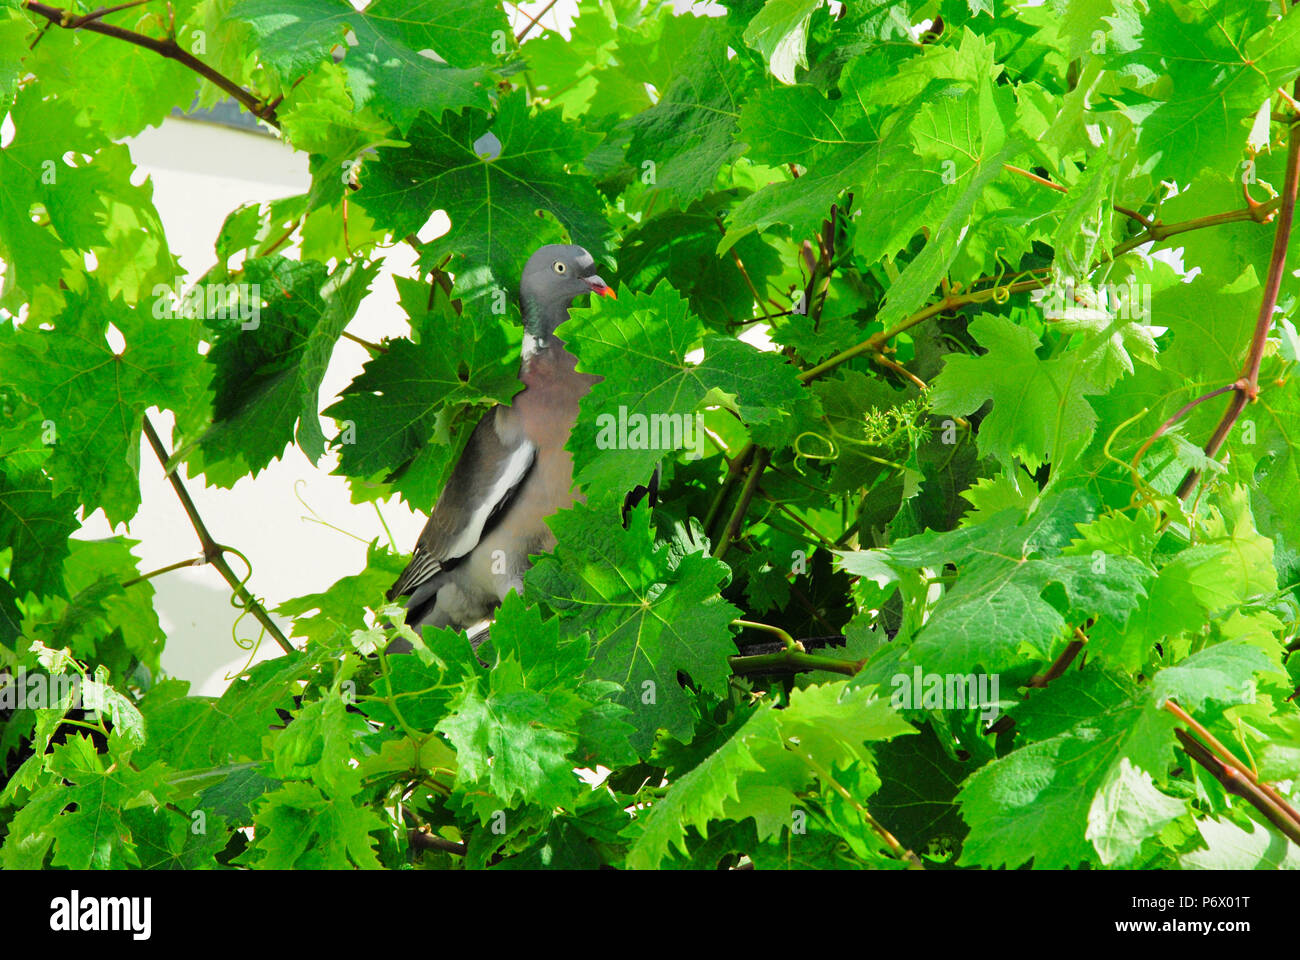 Weymouth. 3rd July 2018. A cheeky pigeon steels tiny grapes from a vine growing on a beach-front cafe in sunny Weynouth Credit: stuart fretwell/Alamy Live News Stock Photo